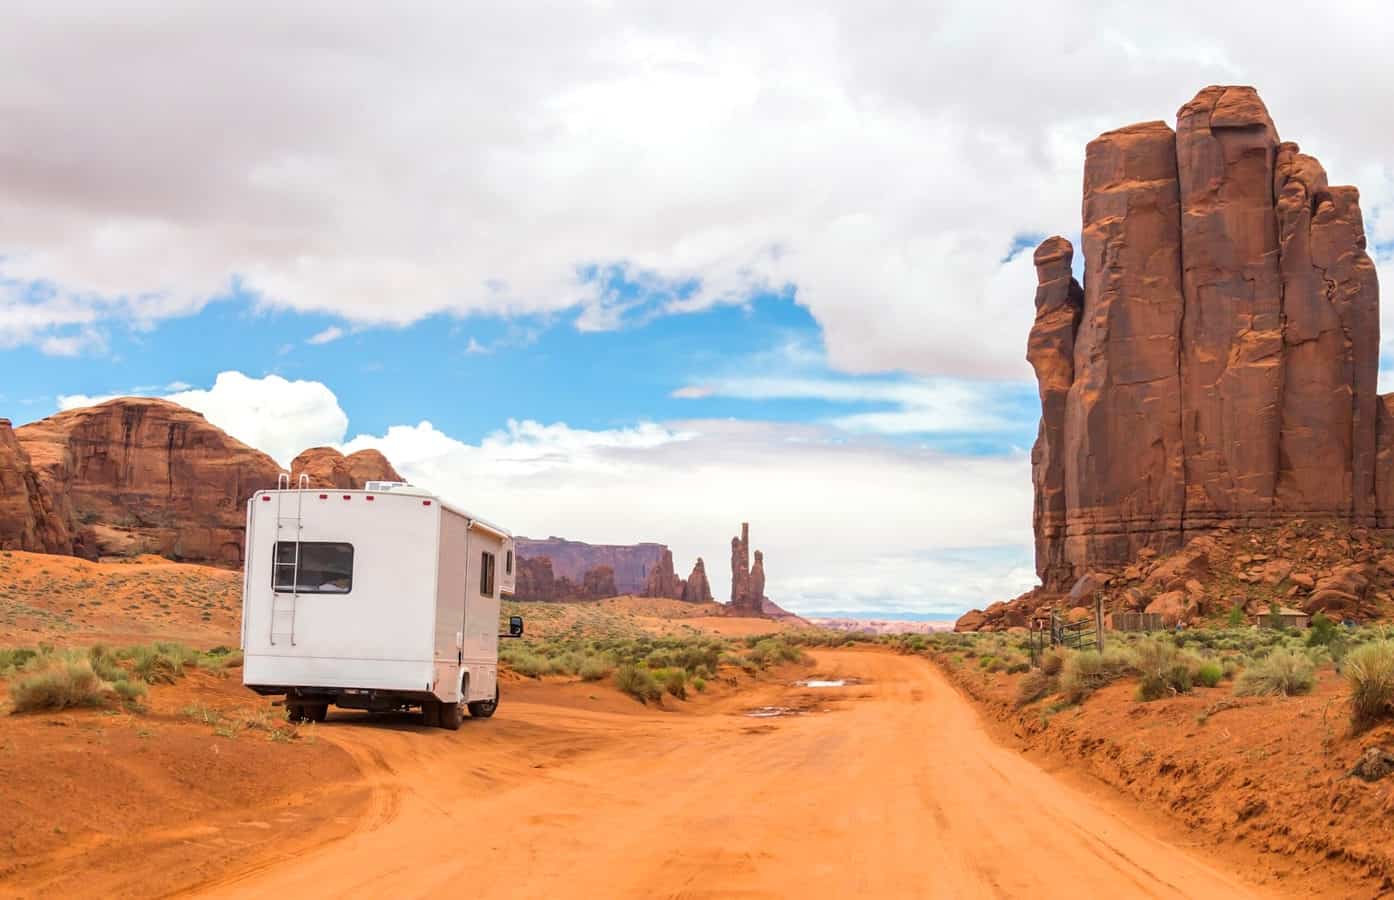 RV on road in Utah without an RV rock guard